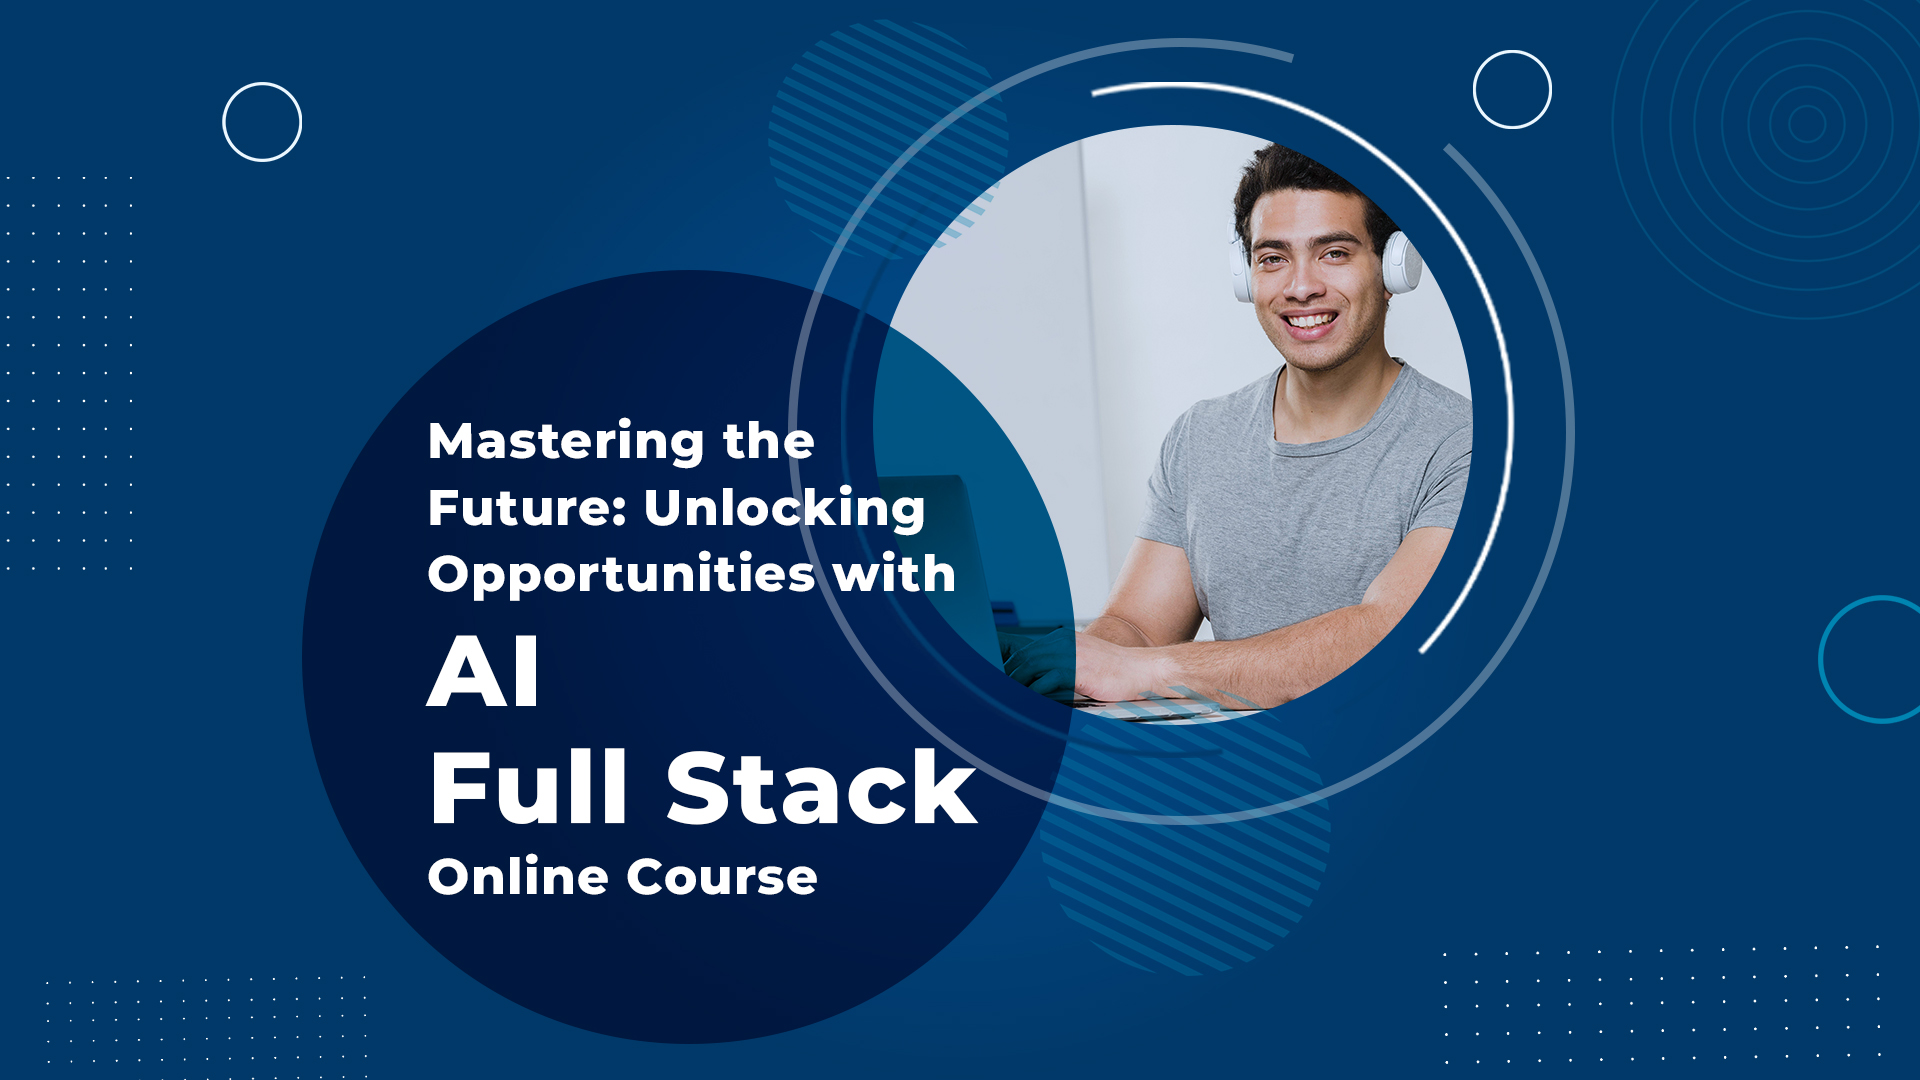 Mastering the Future: Unlocking Opportunities with AI Full Stack Online Course